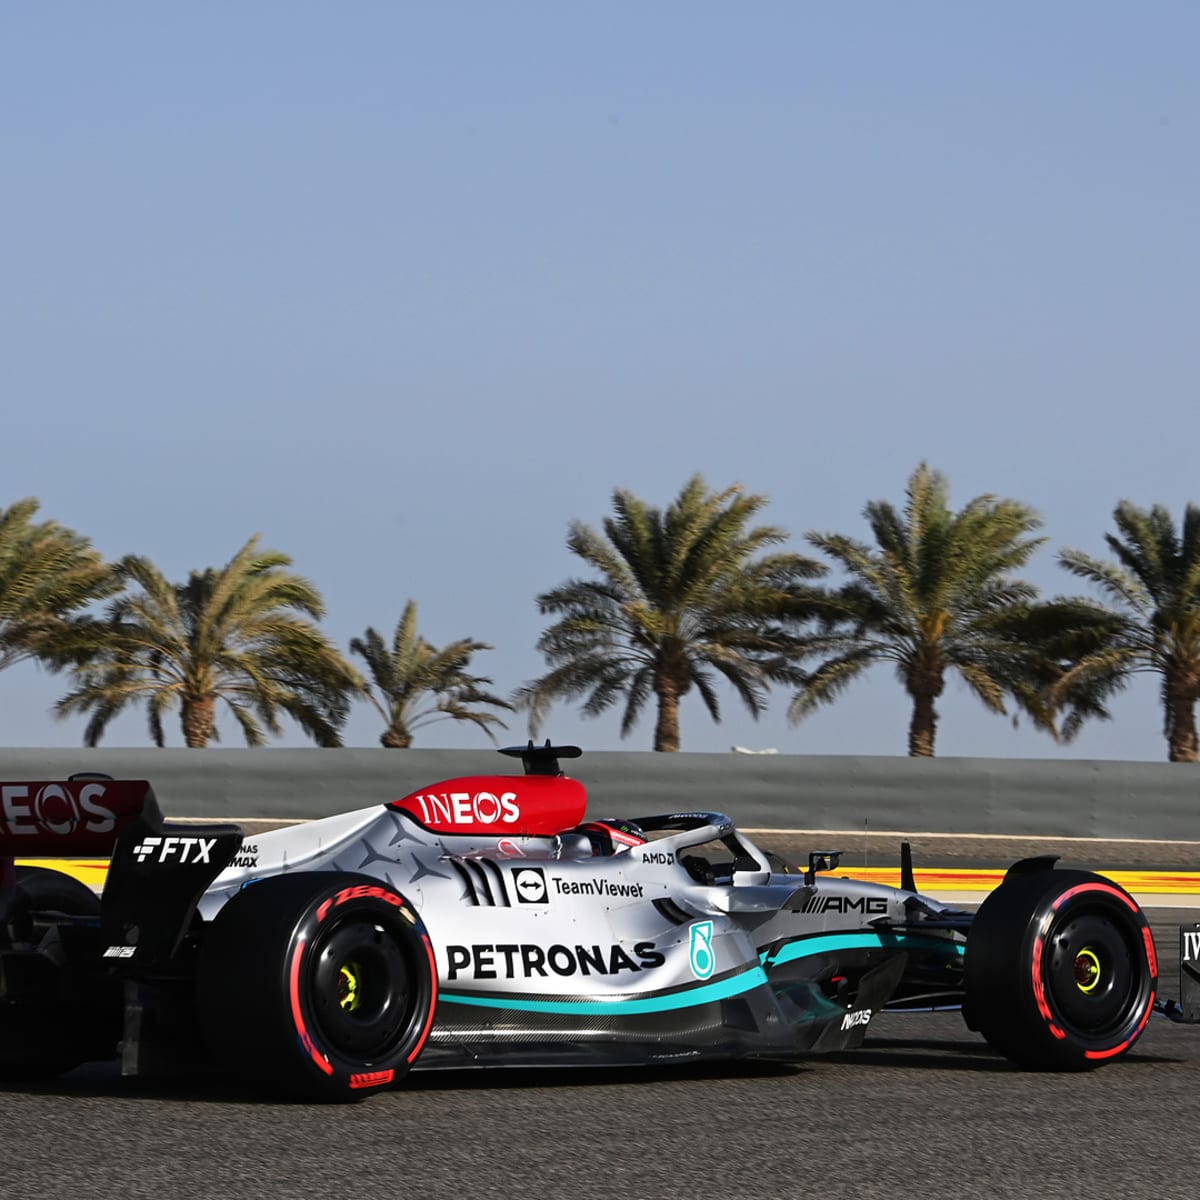 F1 News Bahrain Grand Prix Weather Forecast - What Fans Can Expect